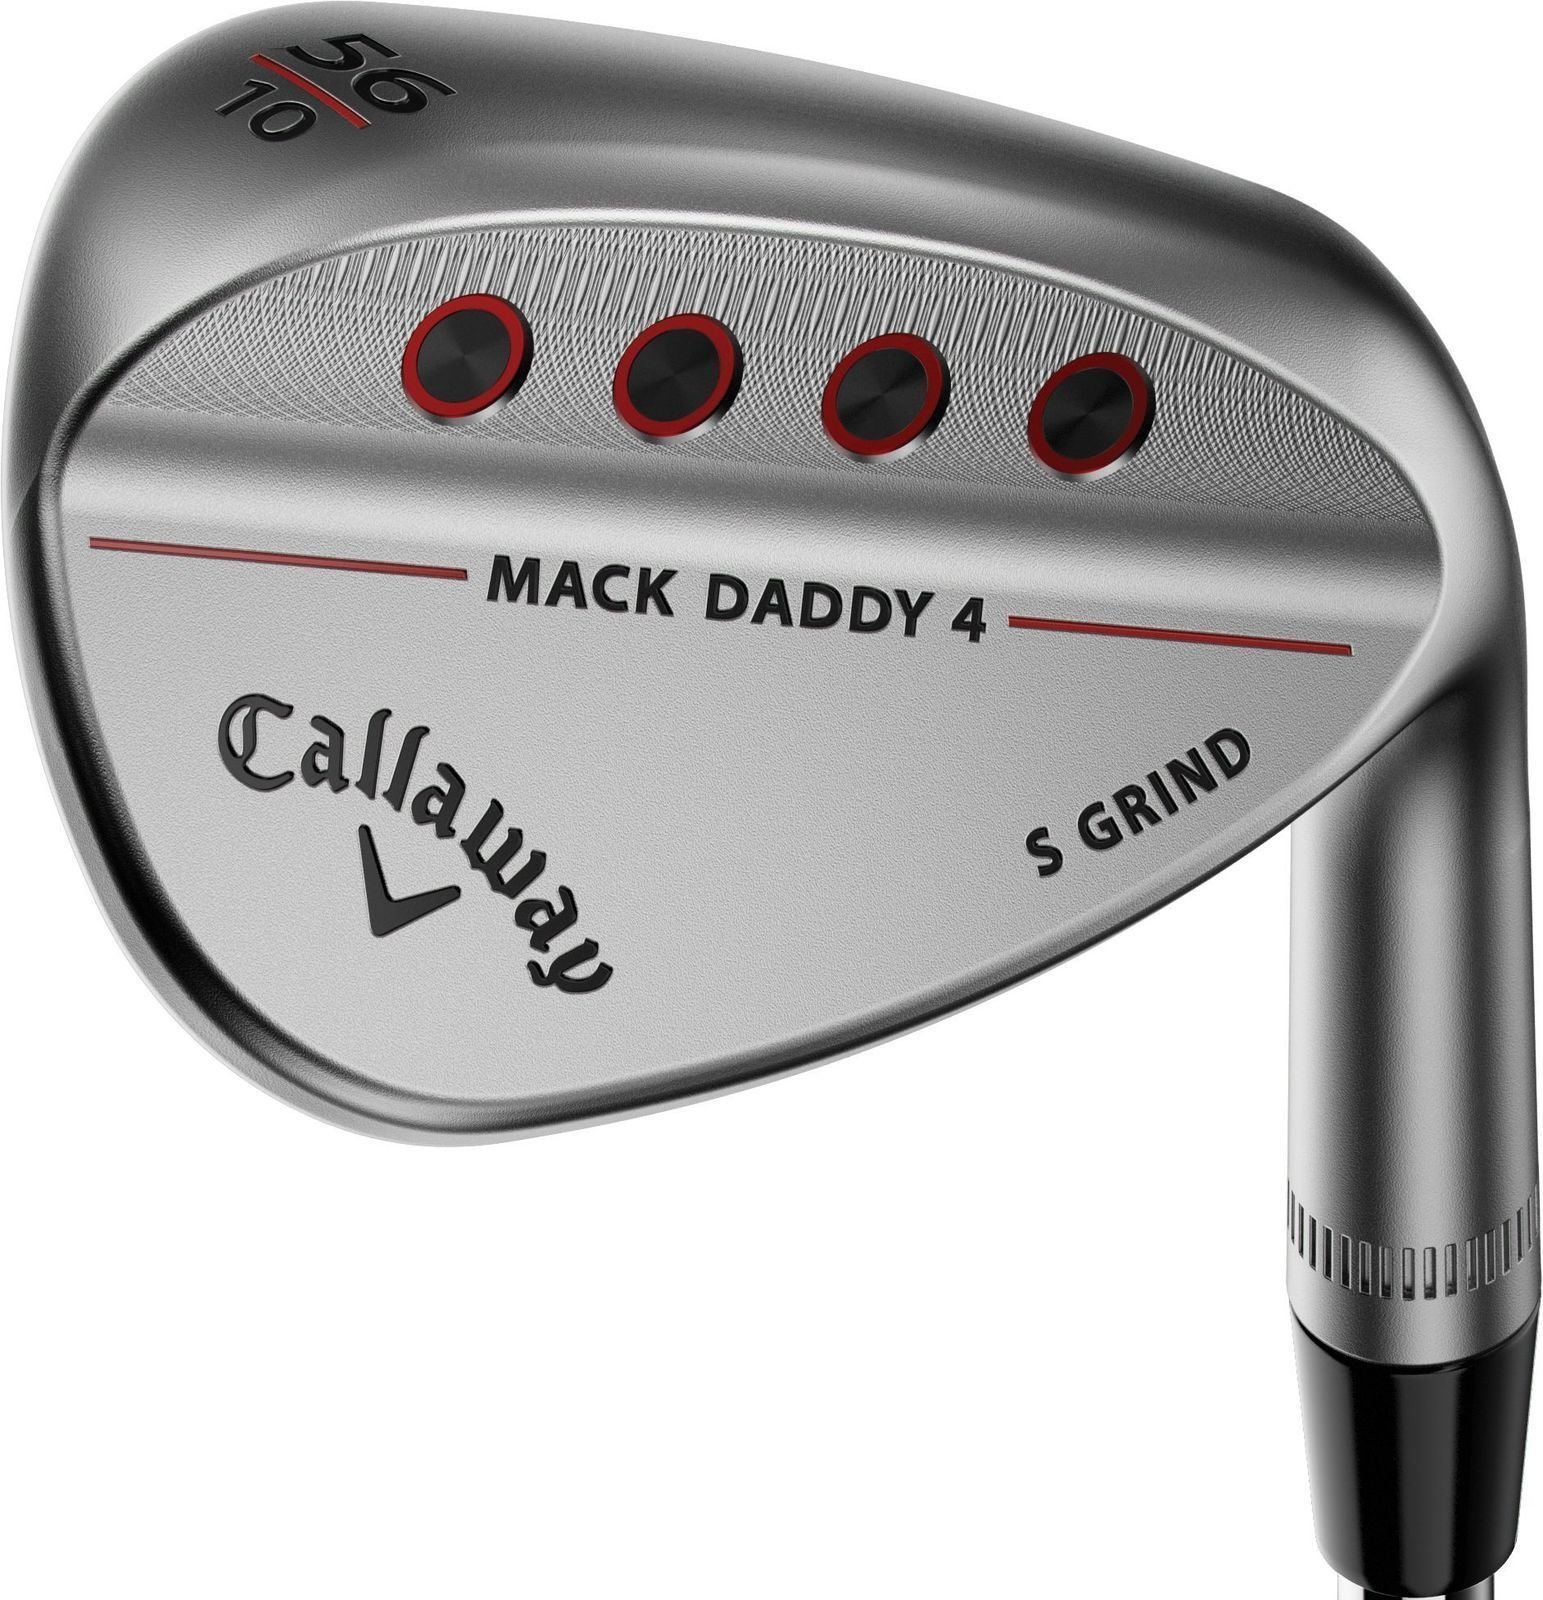 Golfkølle - Wedge Callaway Mack Daddy 4 Chrome Wedge 52-10 S-Grind Right Hand